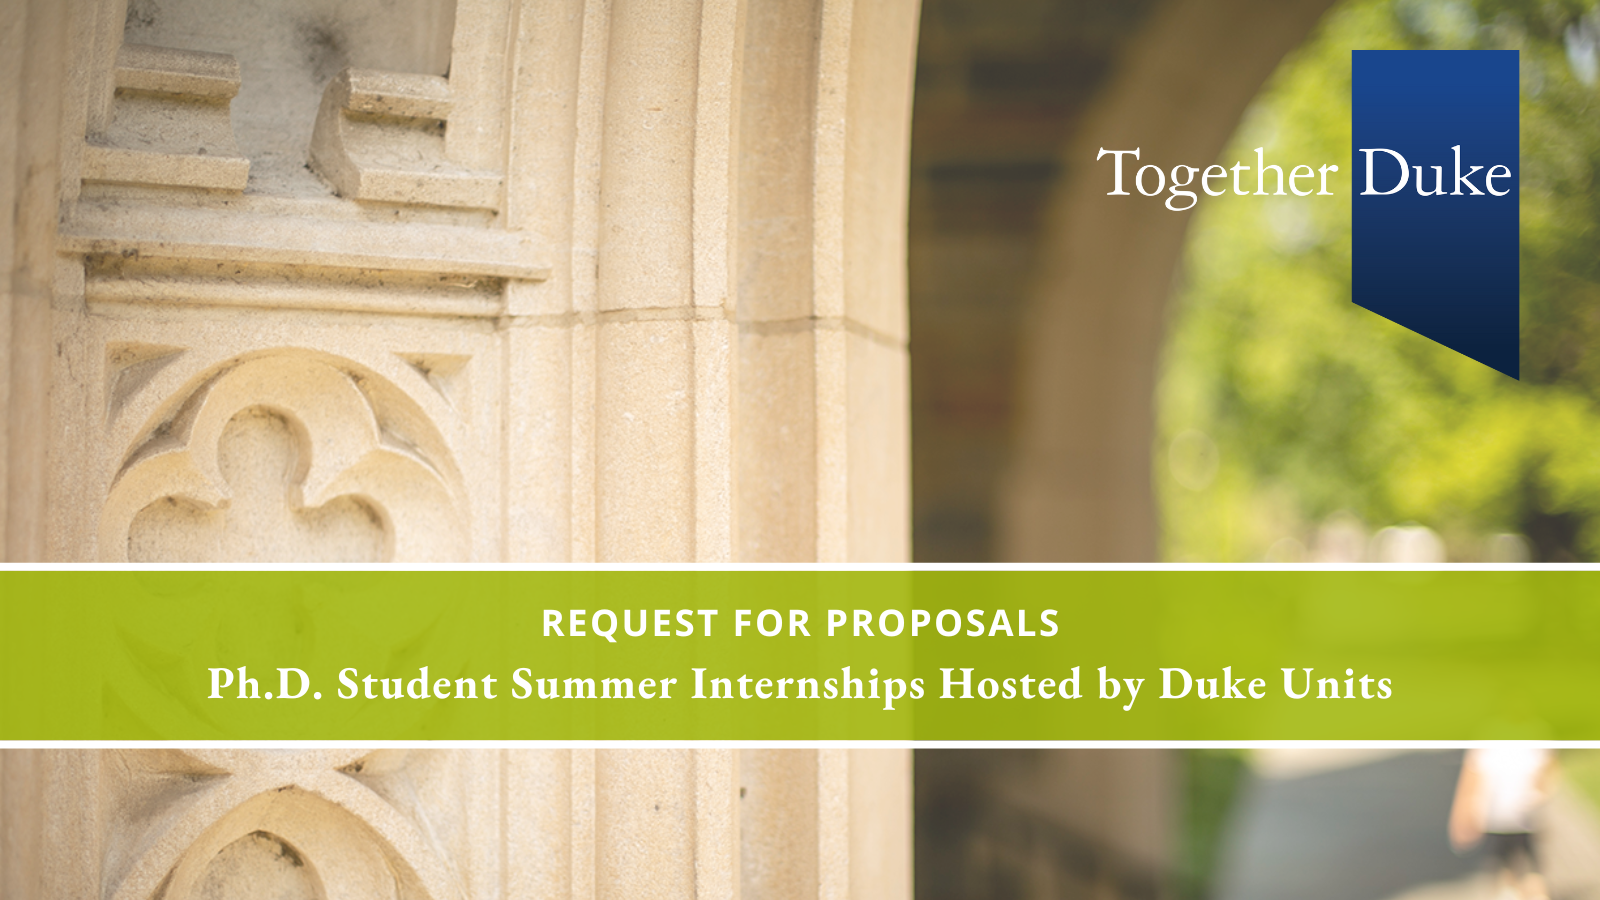 Photo of a stone archway on Duke's campus, with graphic of the Together Duke logo. Text: Request for Proposals. Ph.D. Student Summer Internships Hosted by Duke Units.